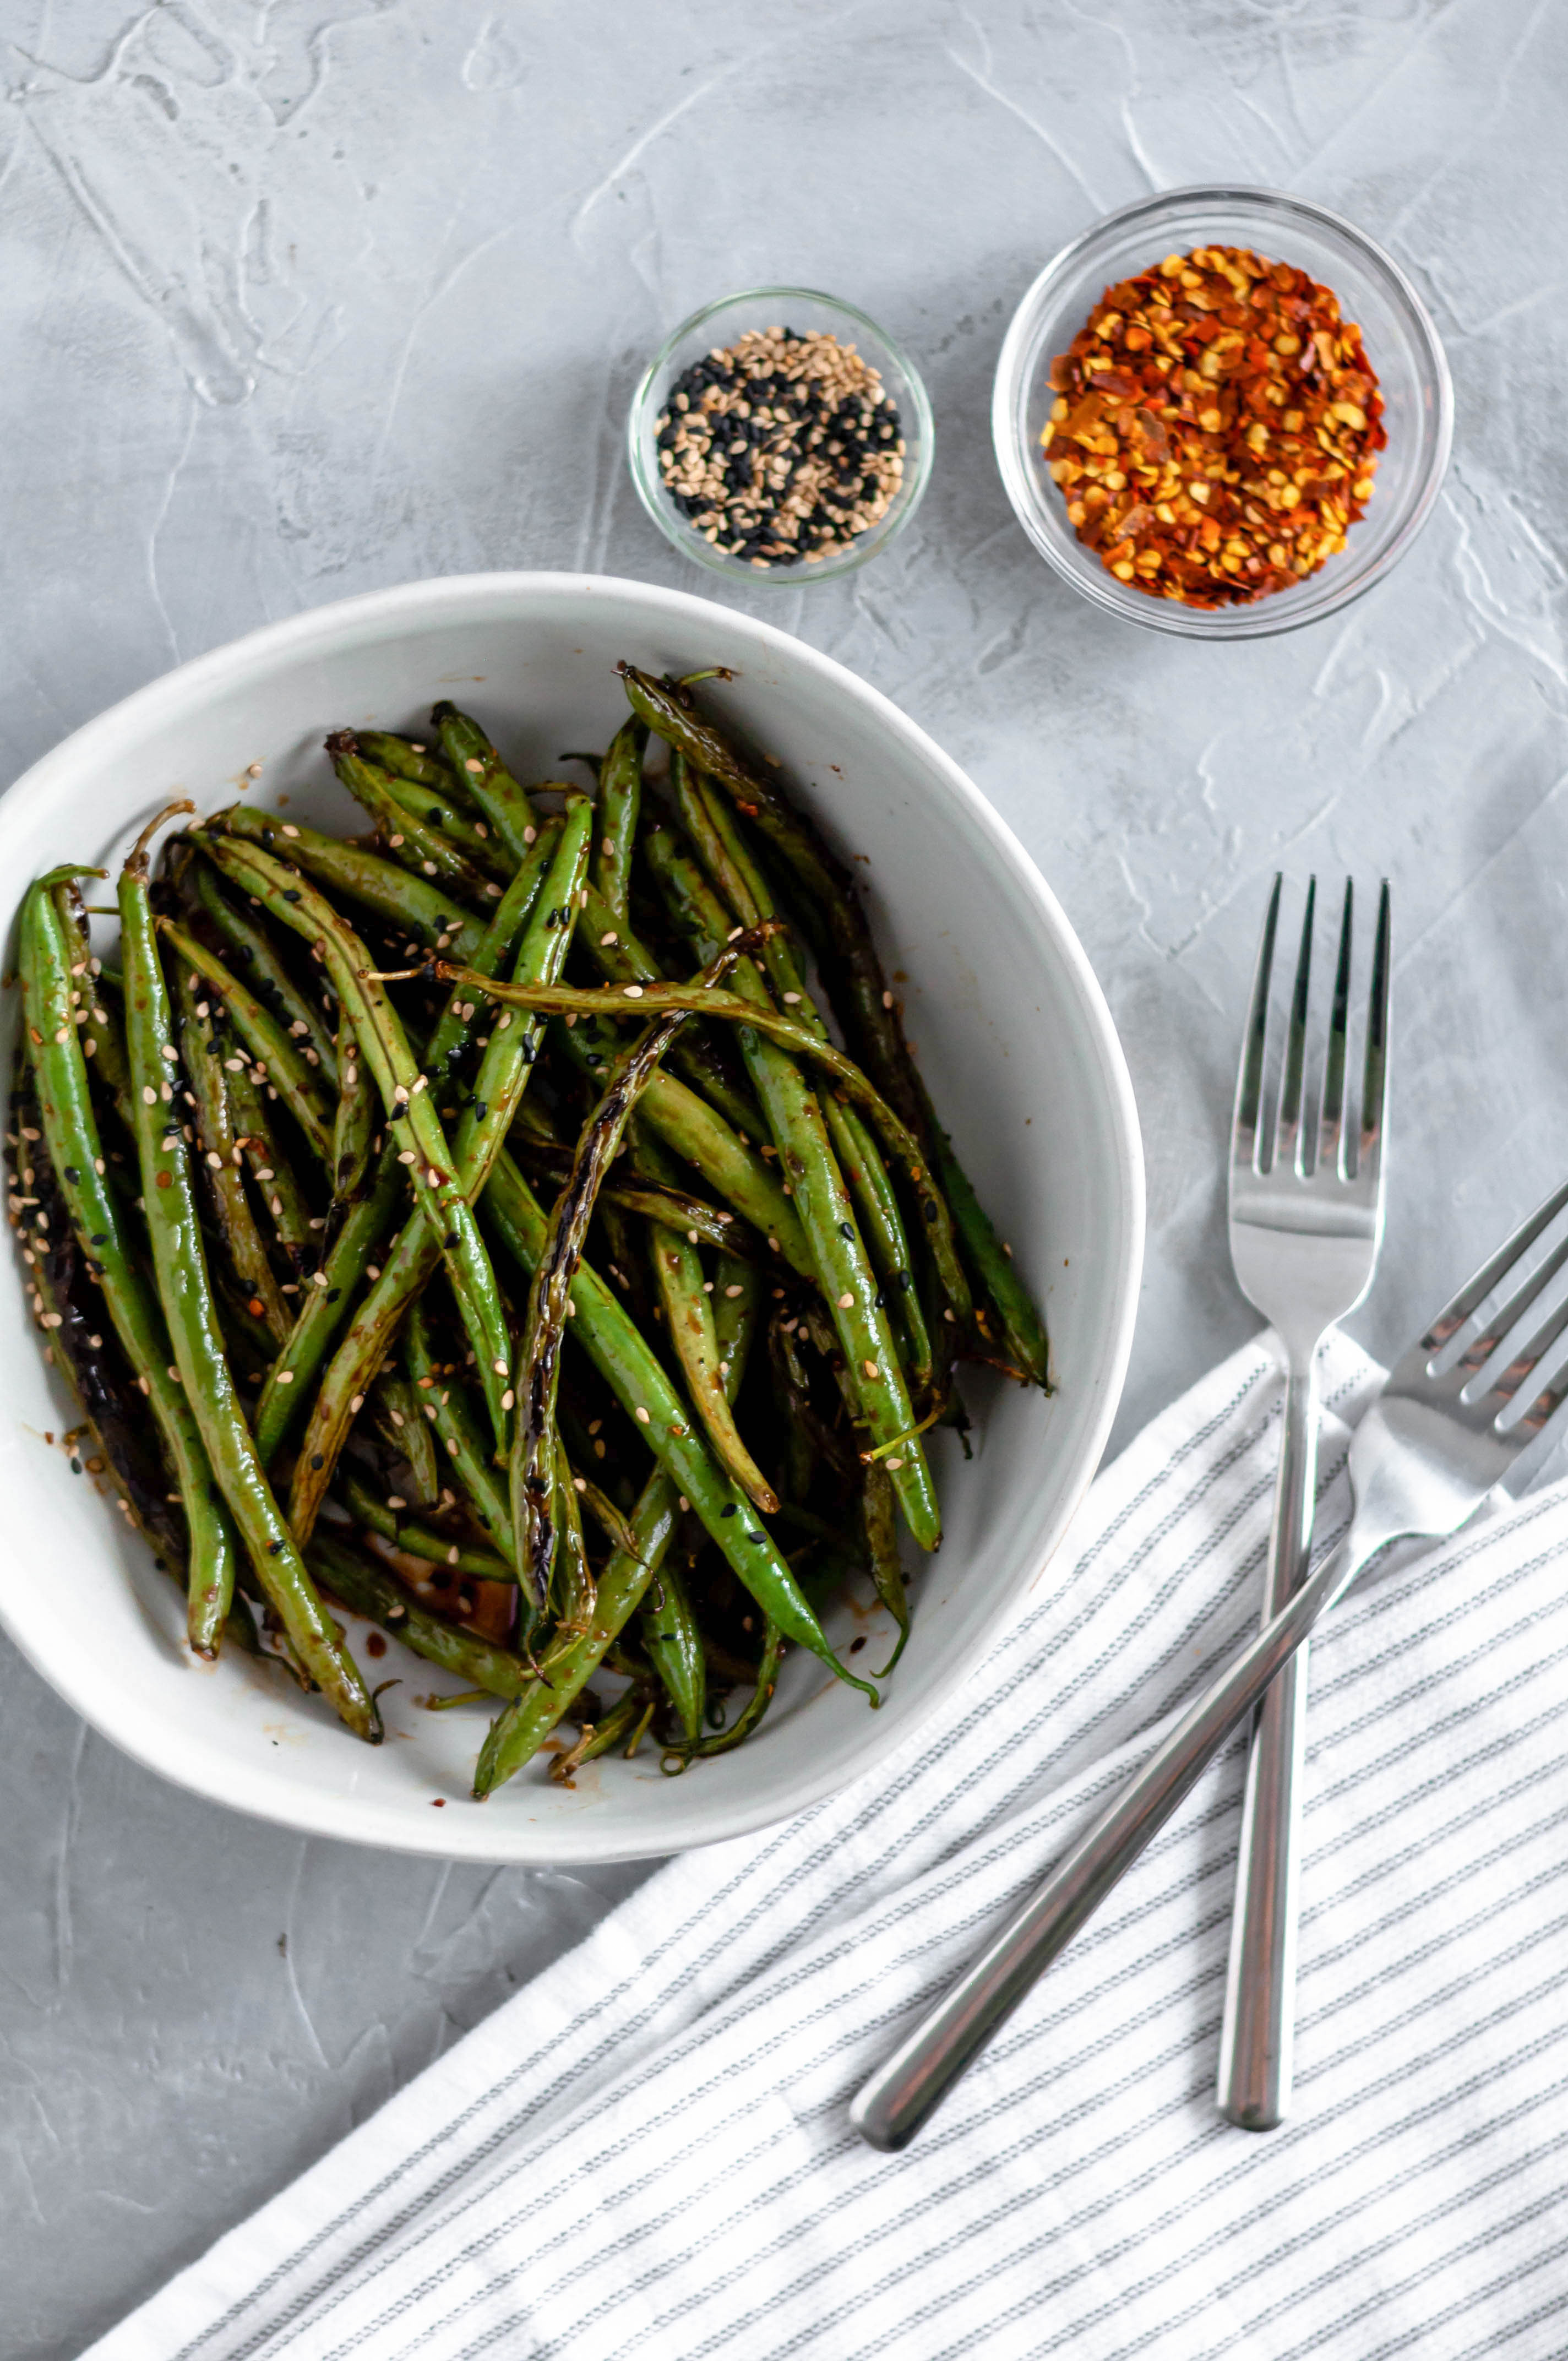 In need of a quick, simple and healthy side dish? These Asian Green Beans take minutes to make and are packed with flavor.